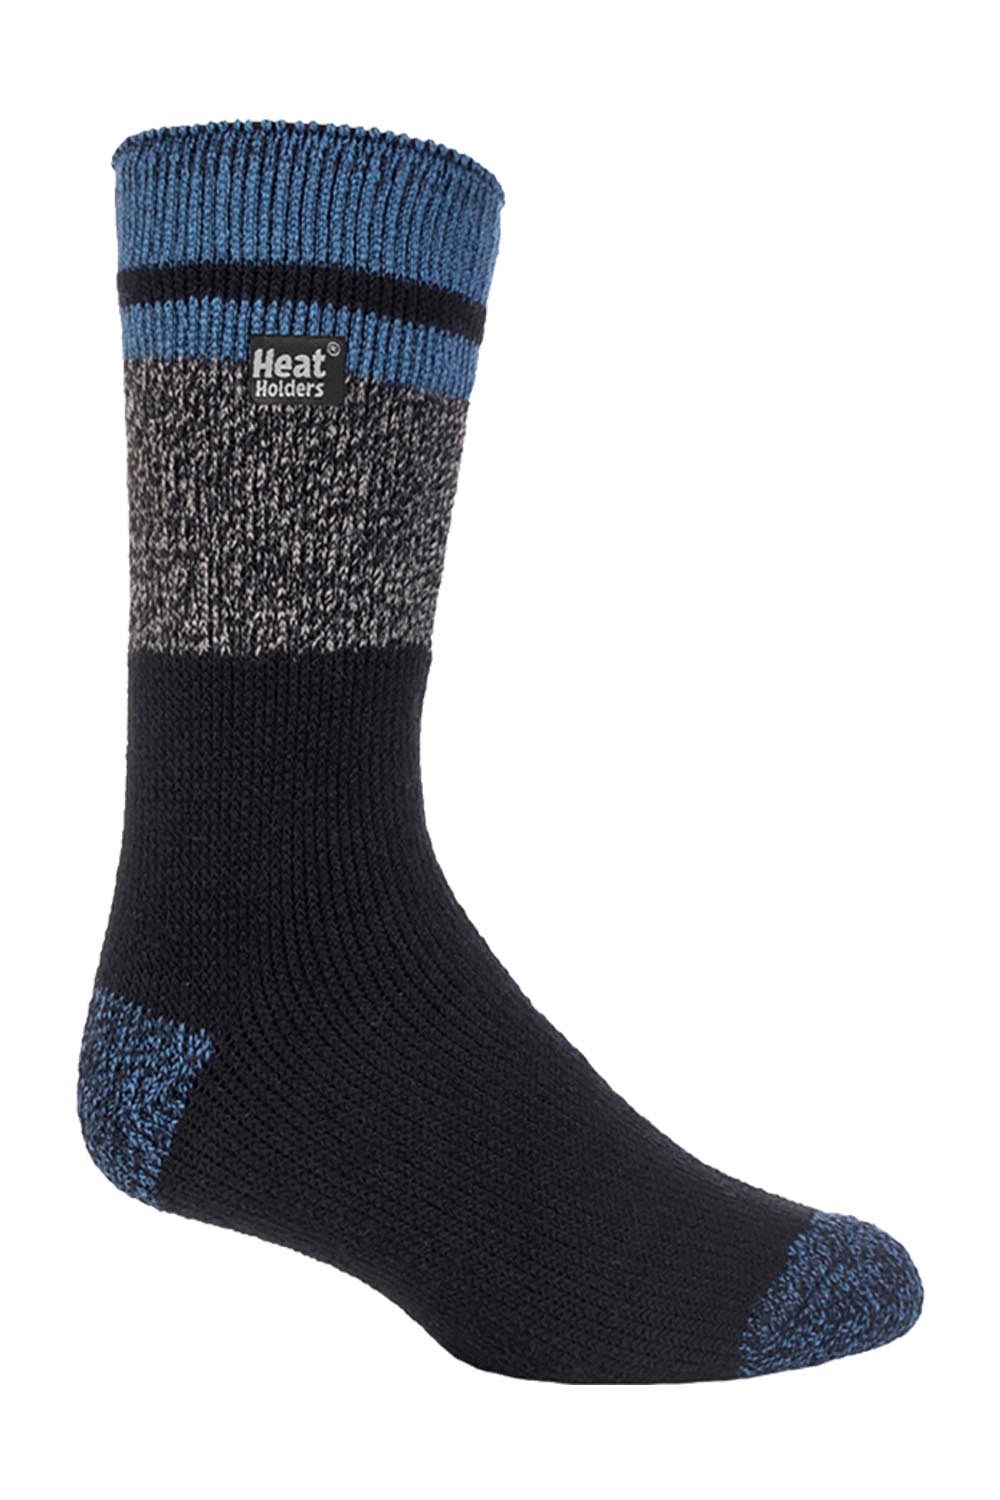 Mens Thick Patterned Thermal Socks